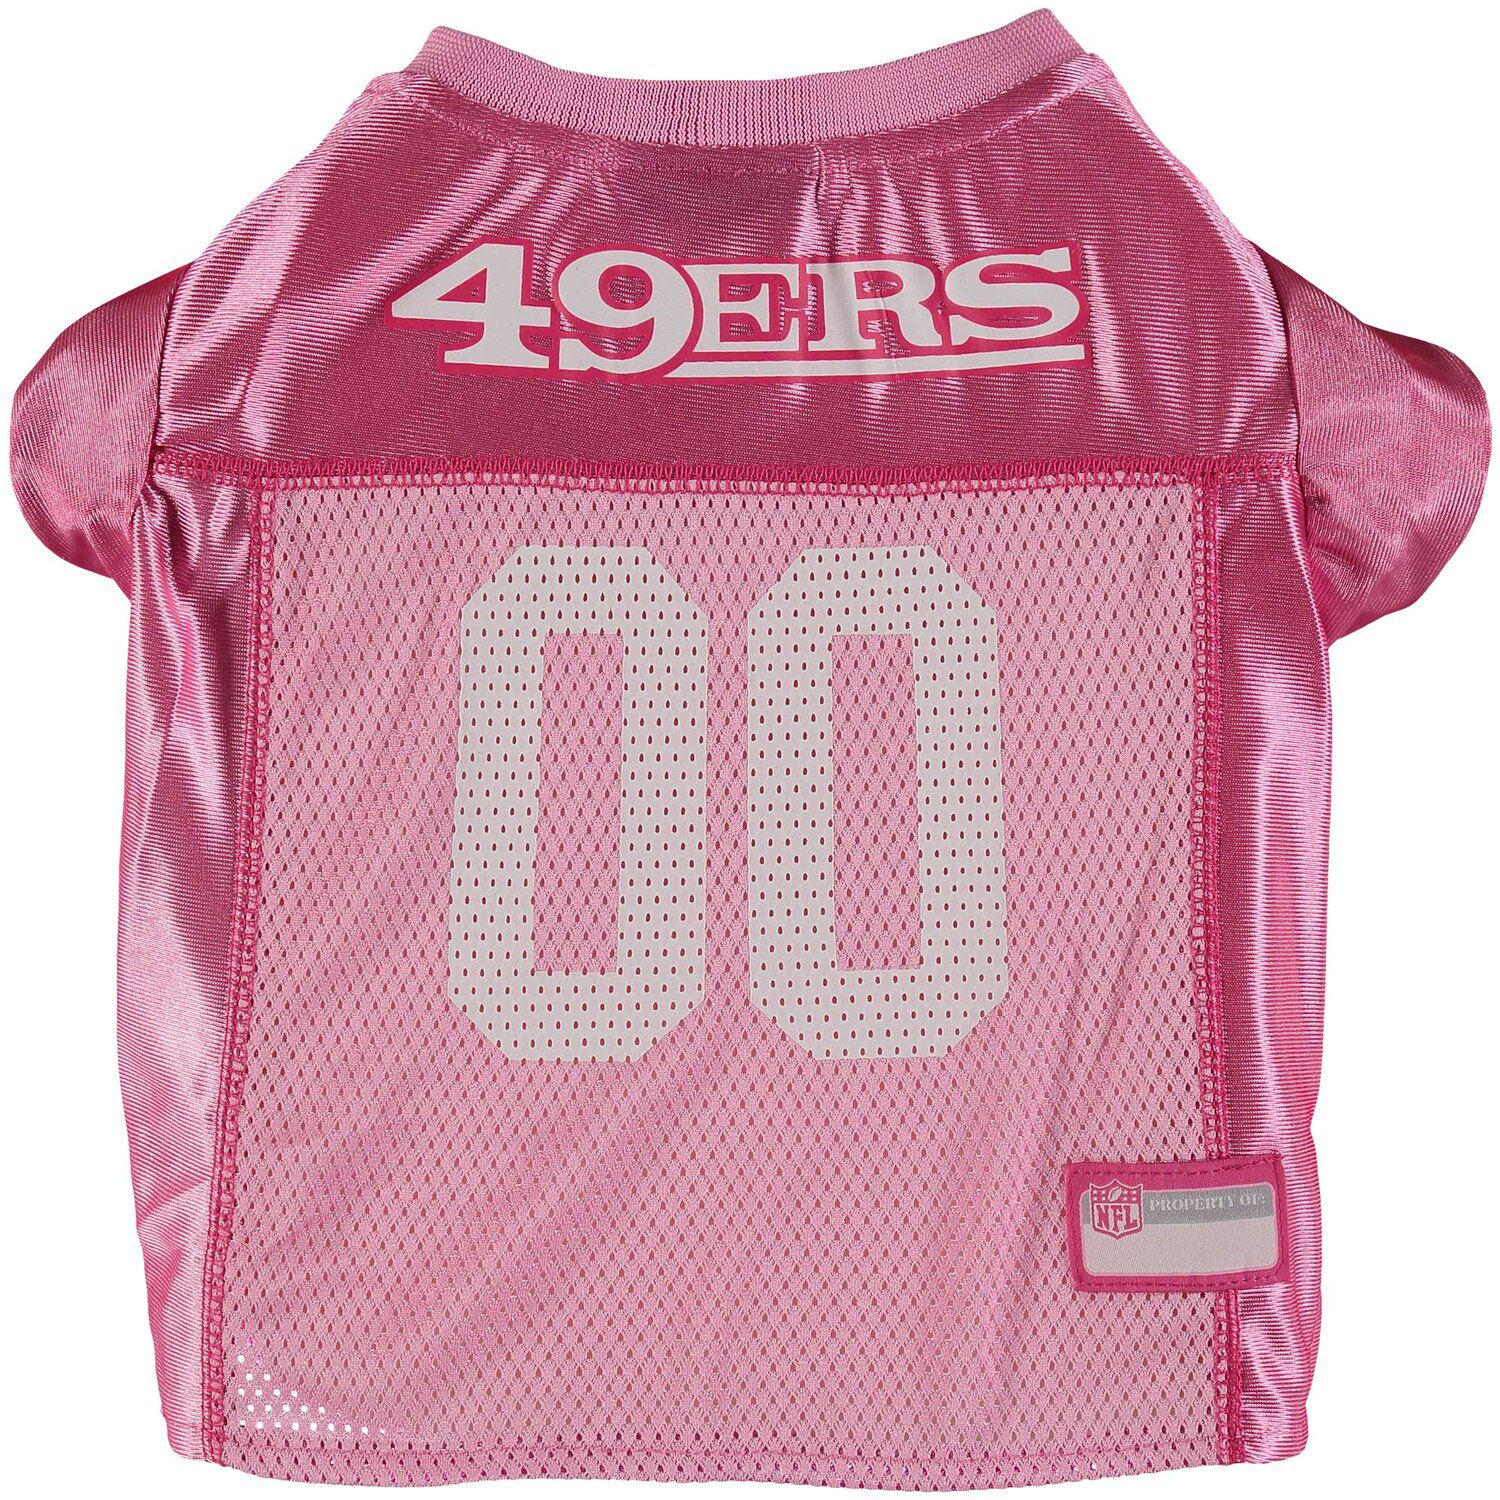 pink 49ers jersey